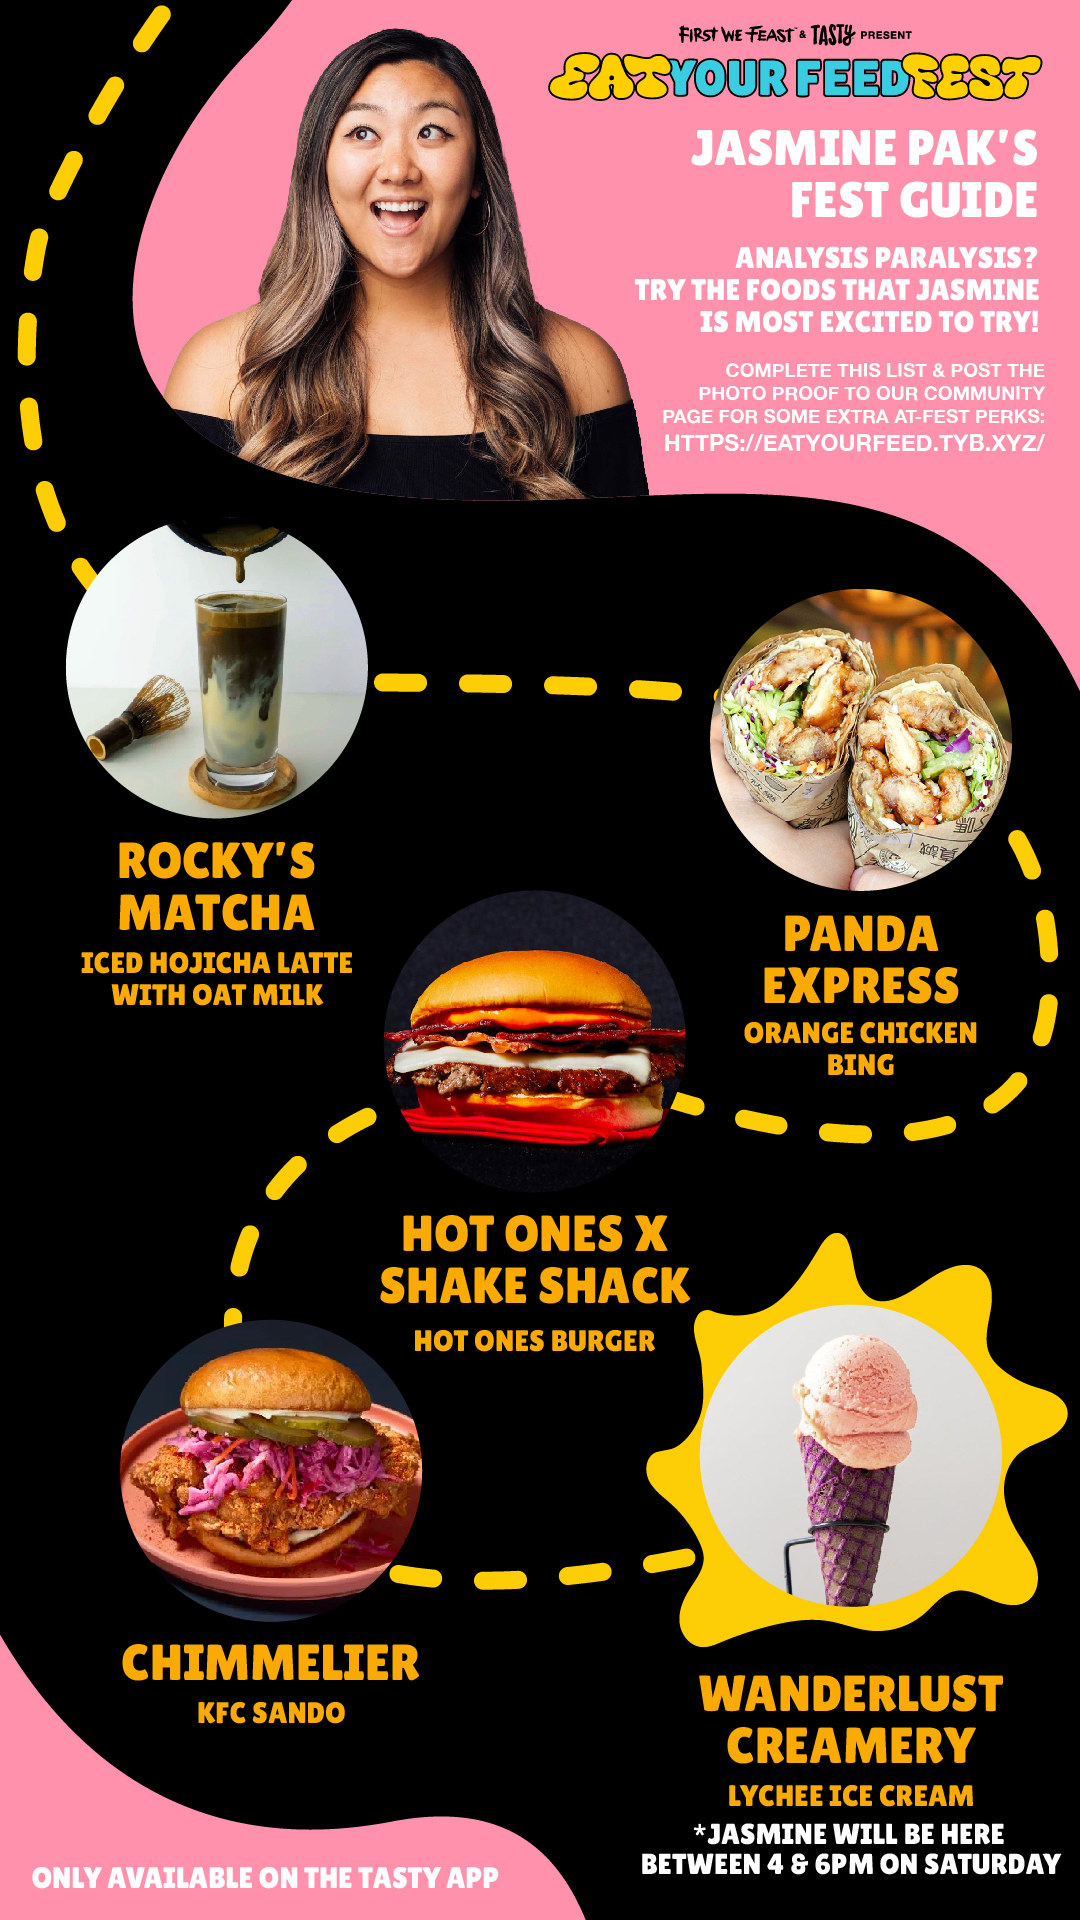 Tasty creator Jasmine Pak lists the food she wants to try at Eat Your Feed Fest including matcha, orange chicken bing, burger, chicken sandwich, and ice cream.